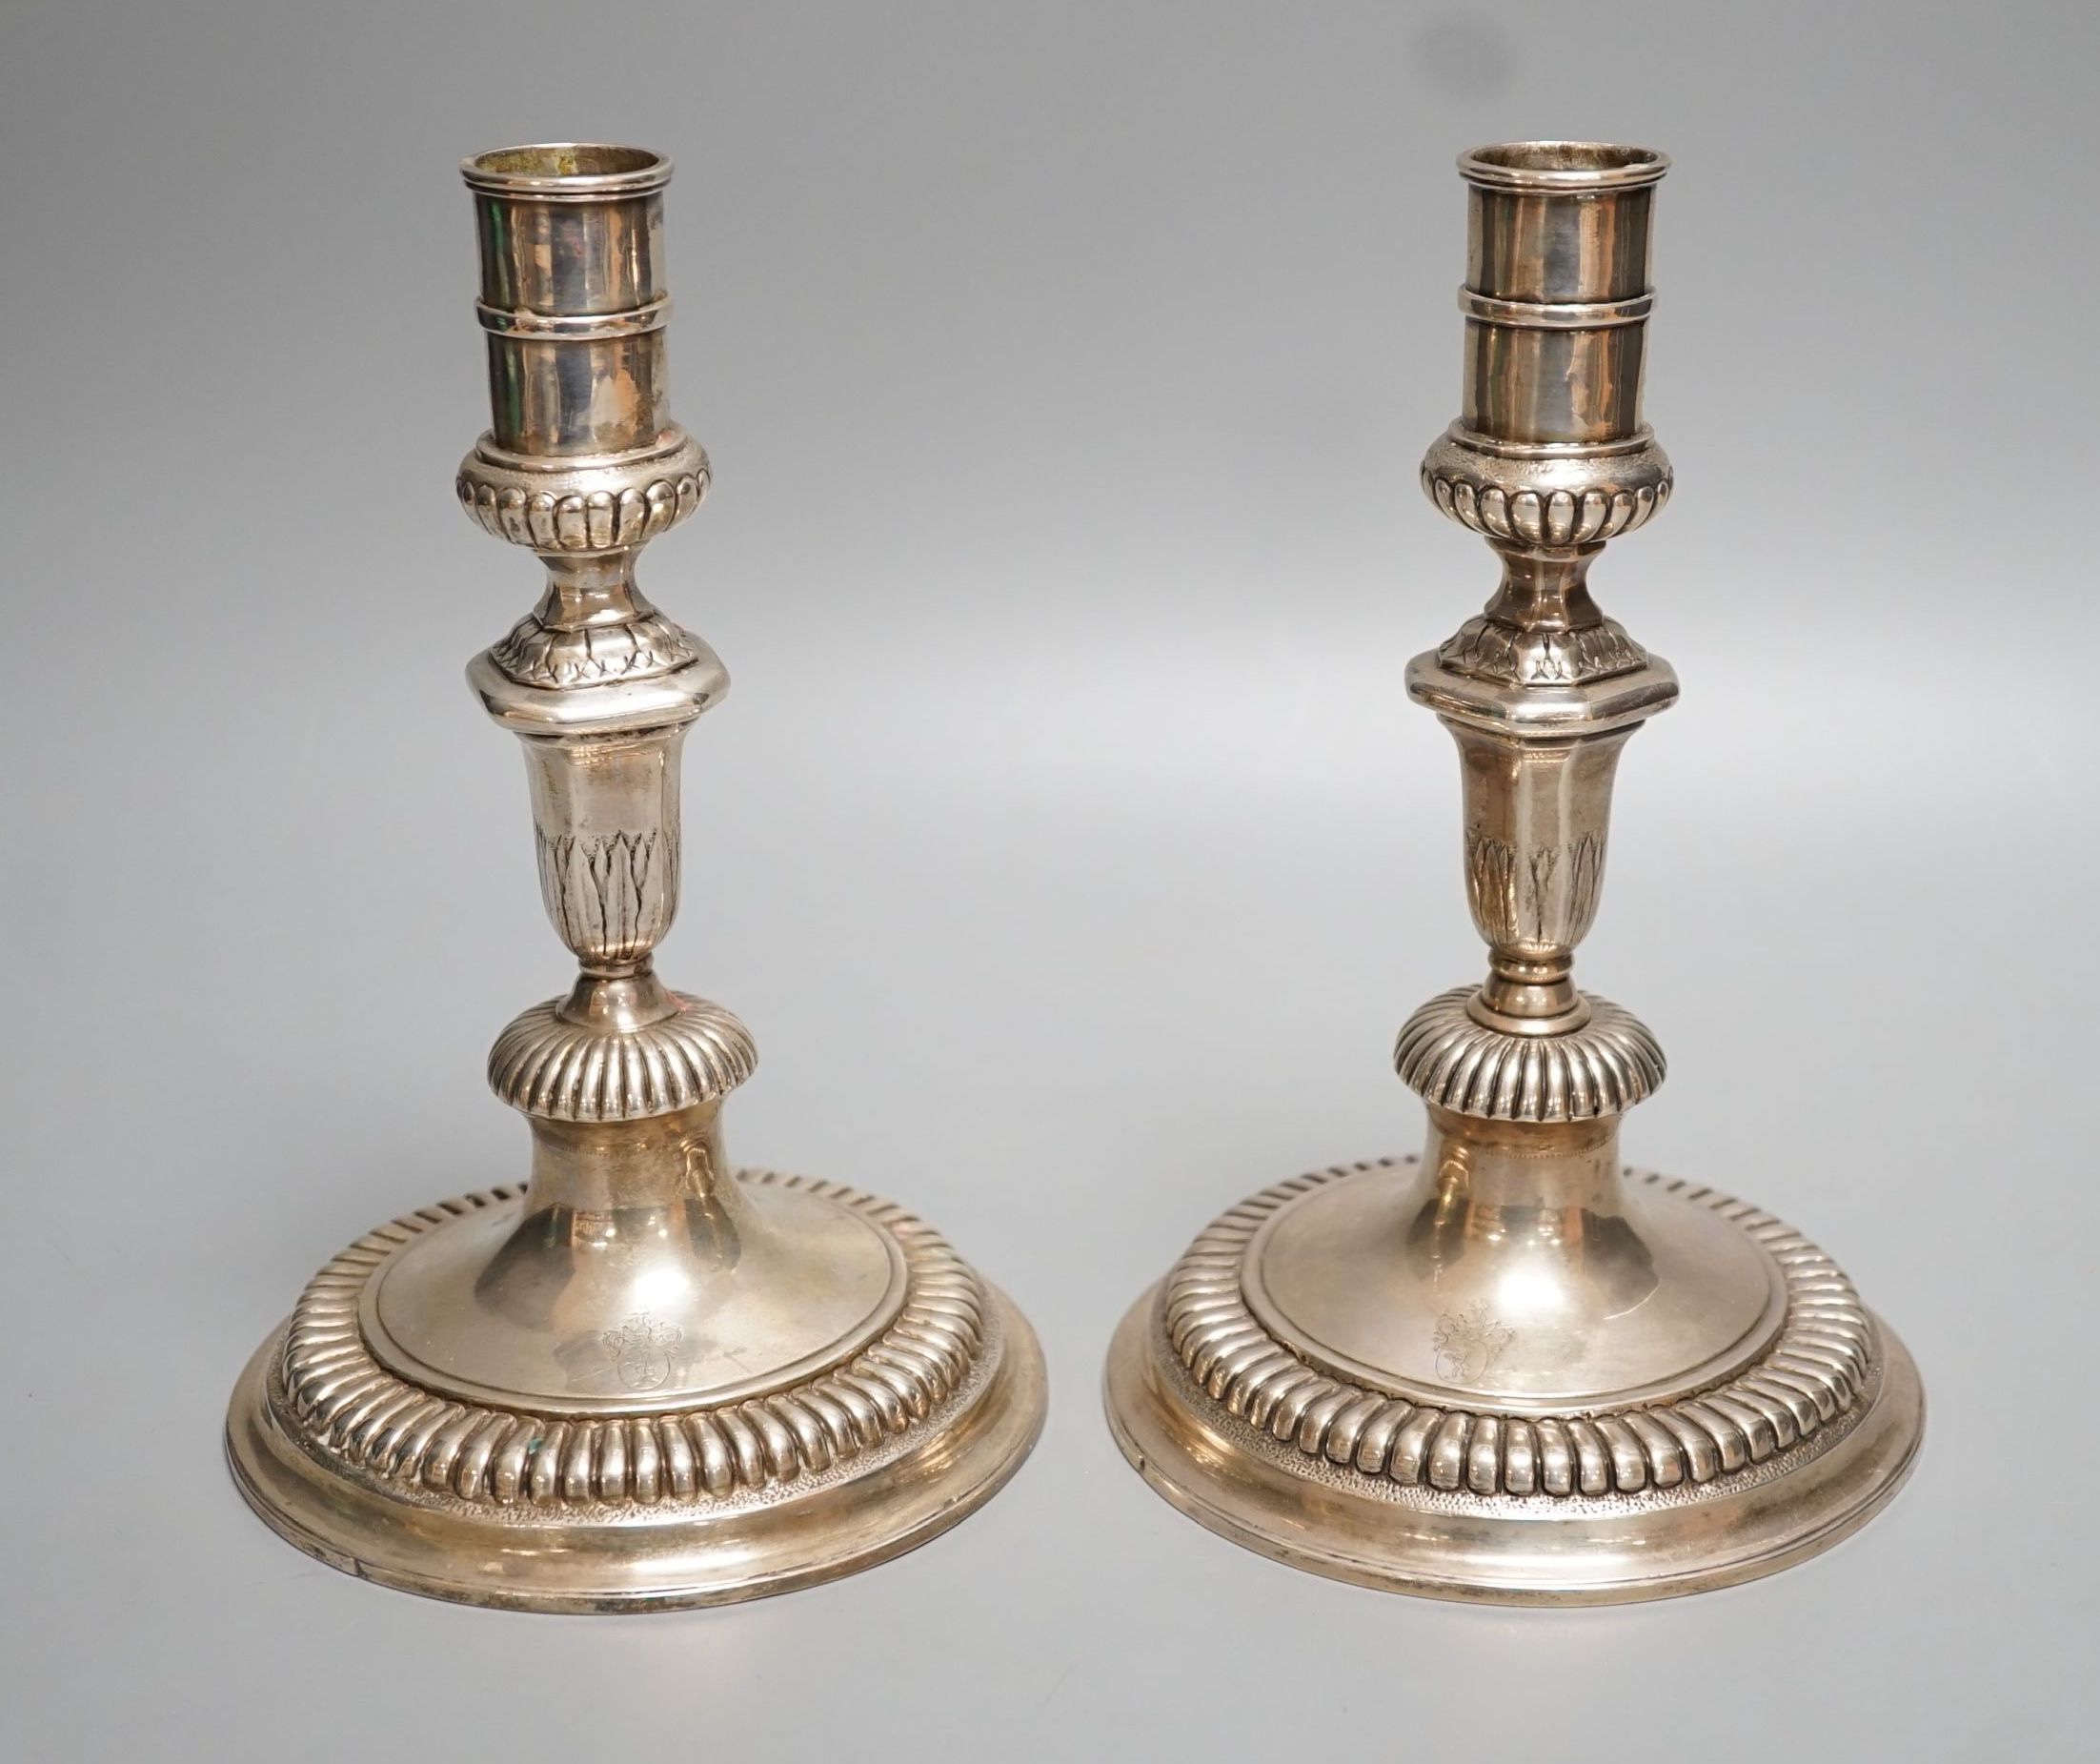 A pair of late 18th/early 19th century German? white metal candlesticks, 19.7cm, 18oz.